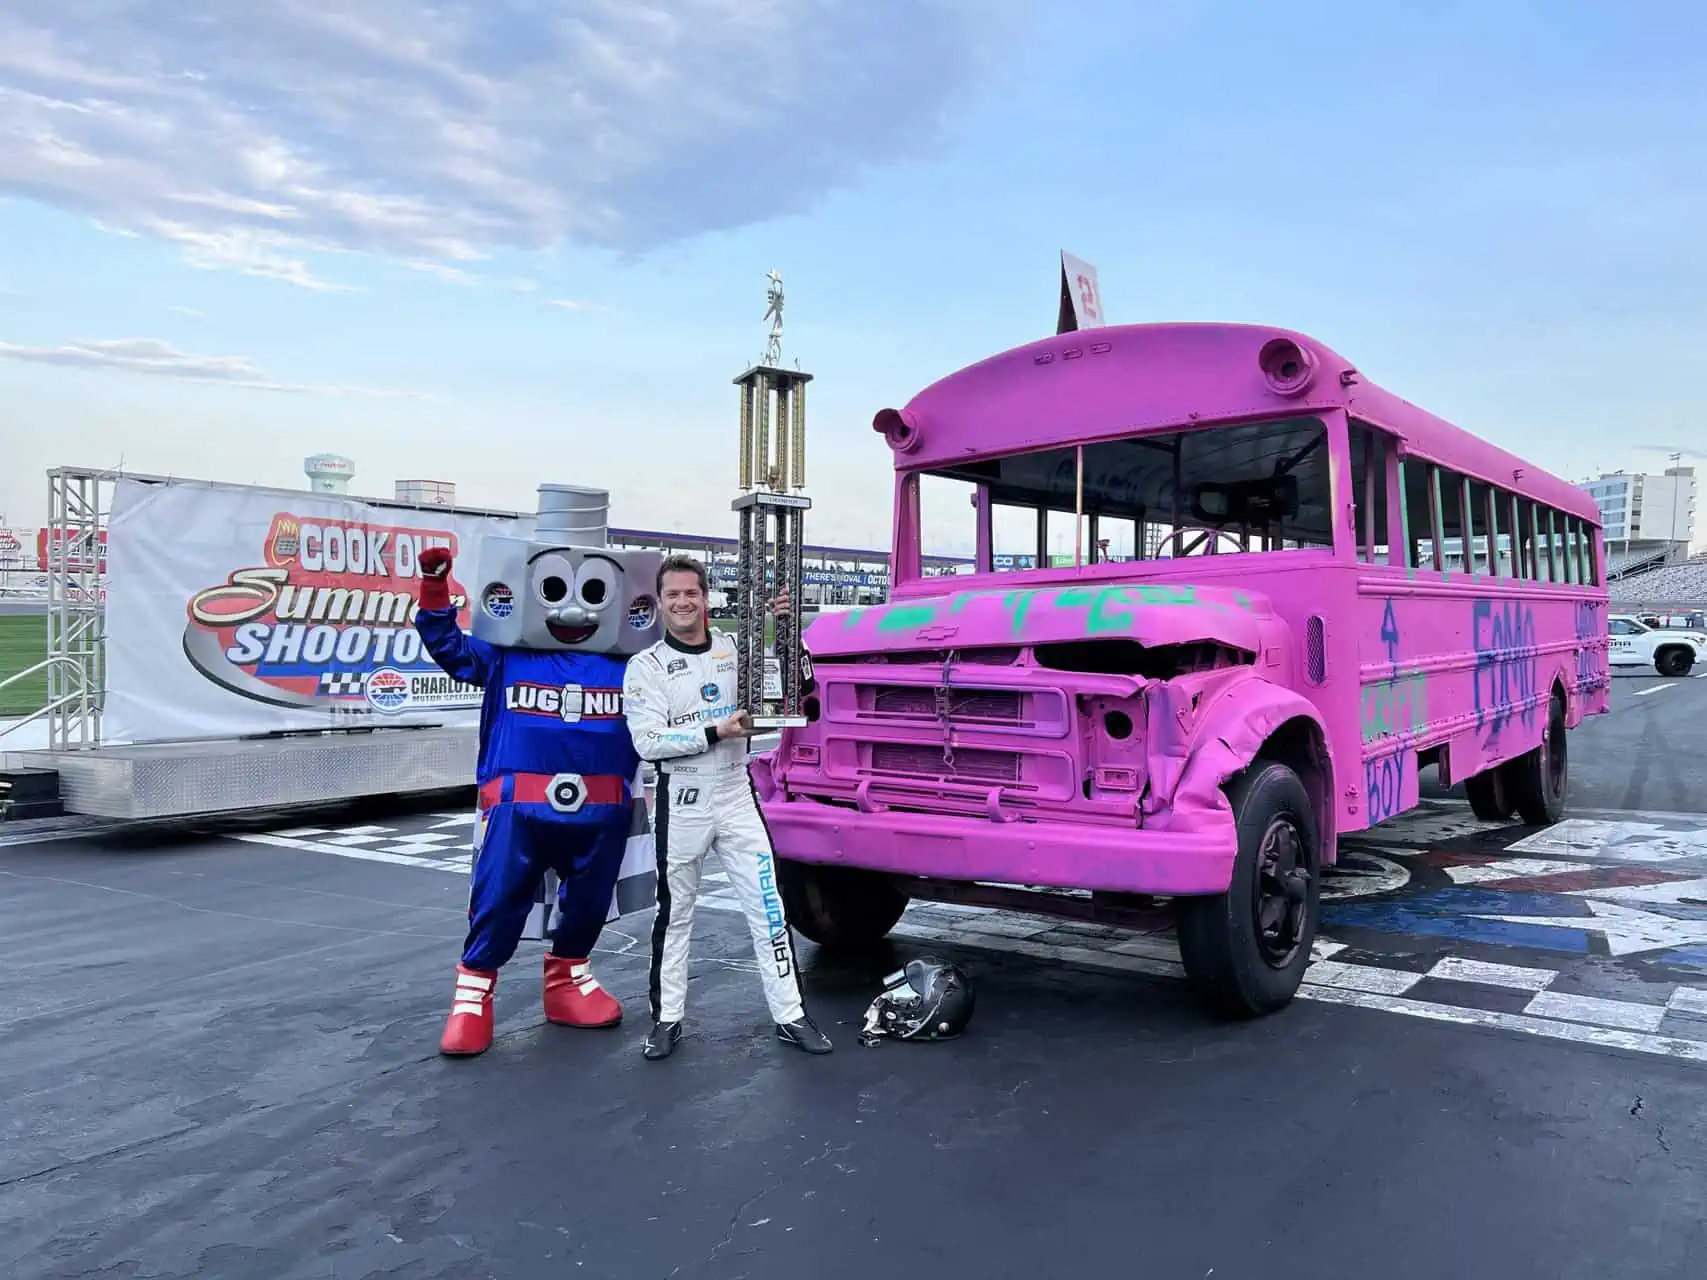 Kaulig Racing gives back to short track racing as Landon Cassill, Justin Haley, Daniel Hemric, and Chris Rice raced school buses in the Cook Out Summer Shootout at Charlotte Motor Speedway.